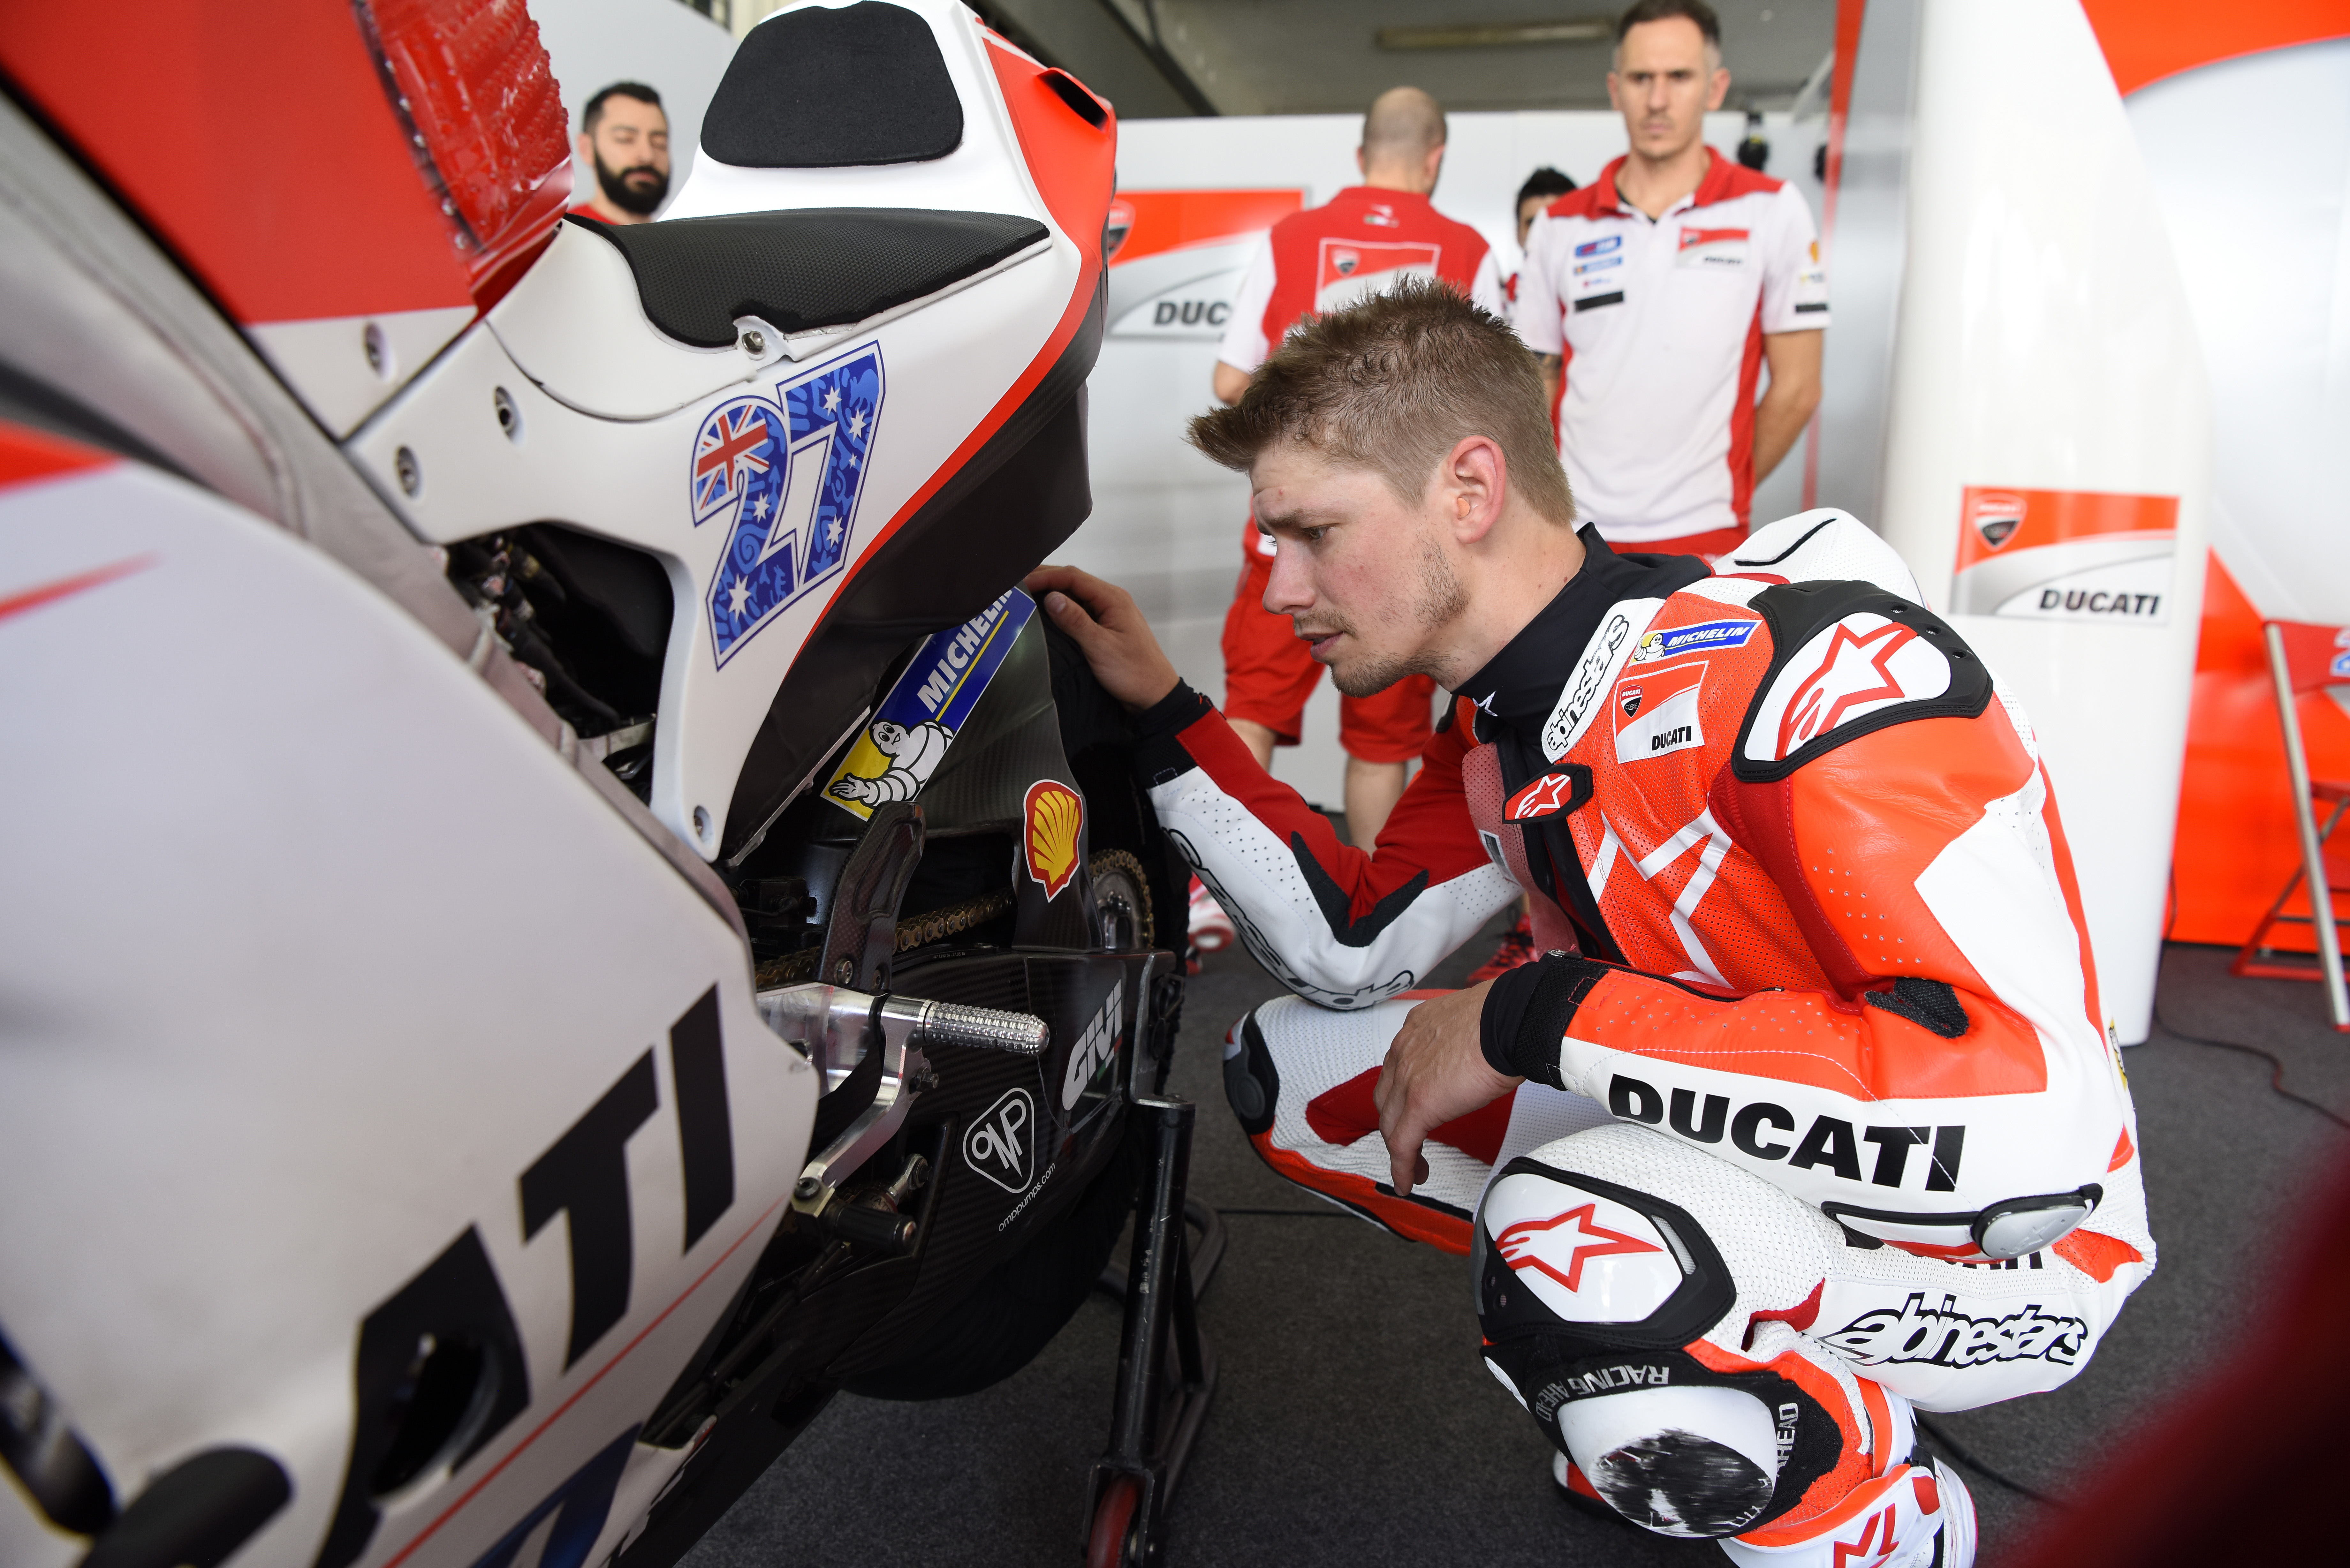 Casey Stoner completes Sepang test for Ducati